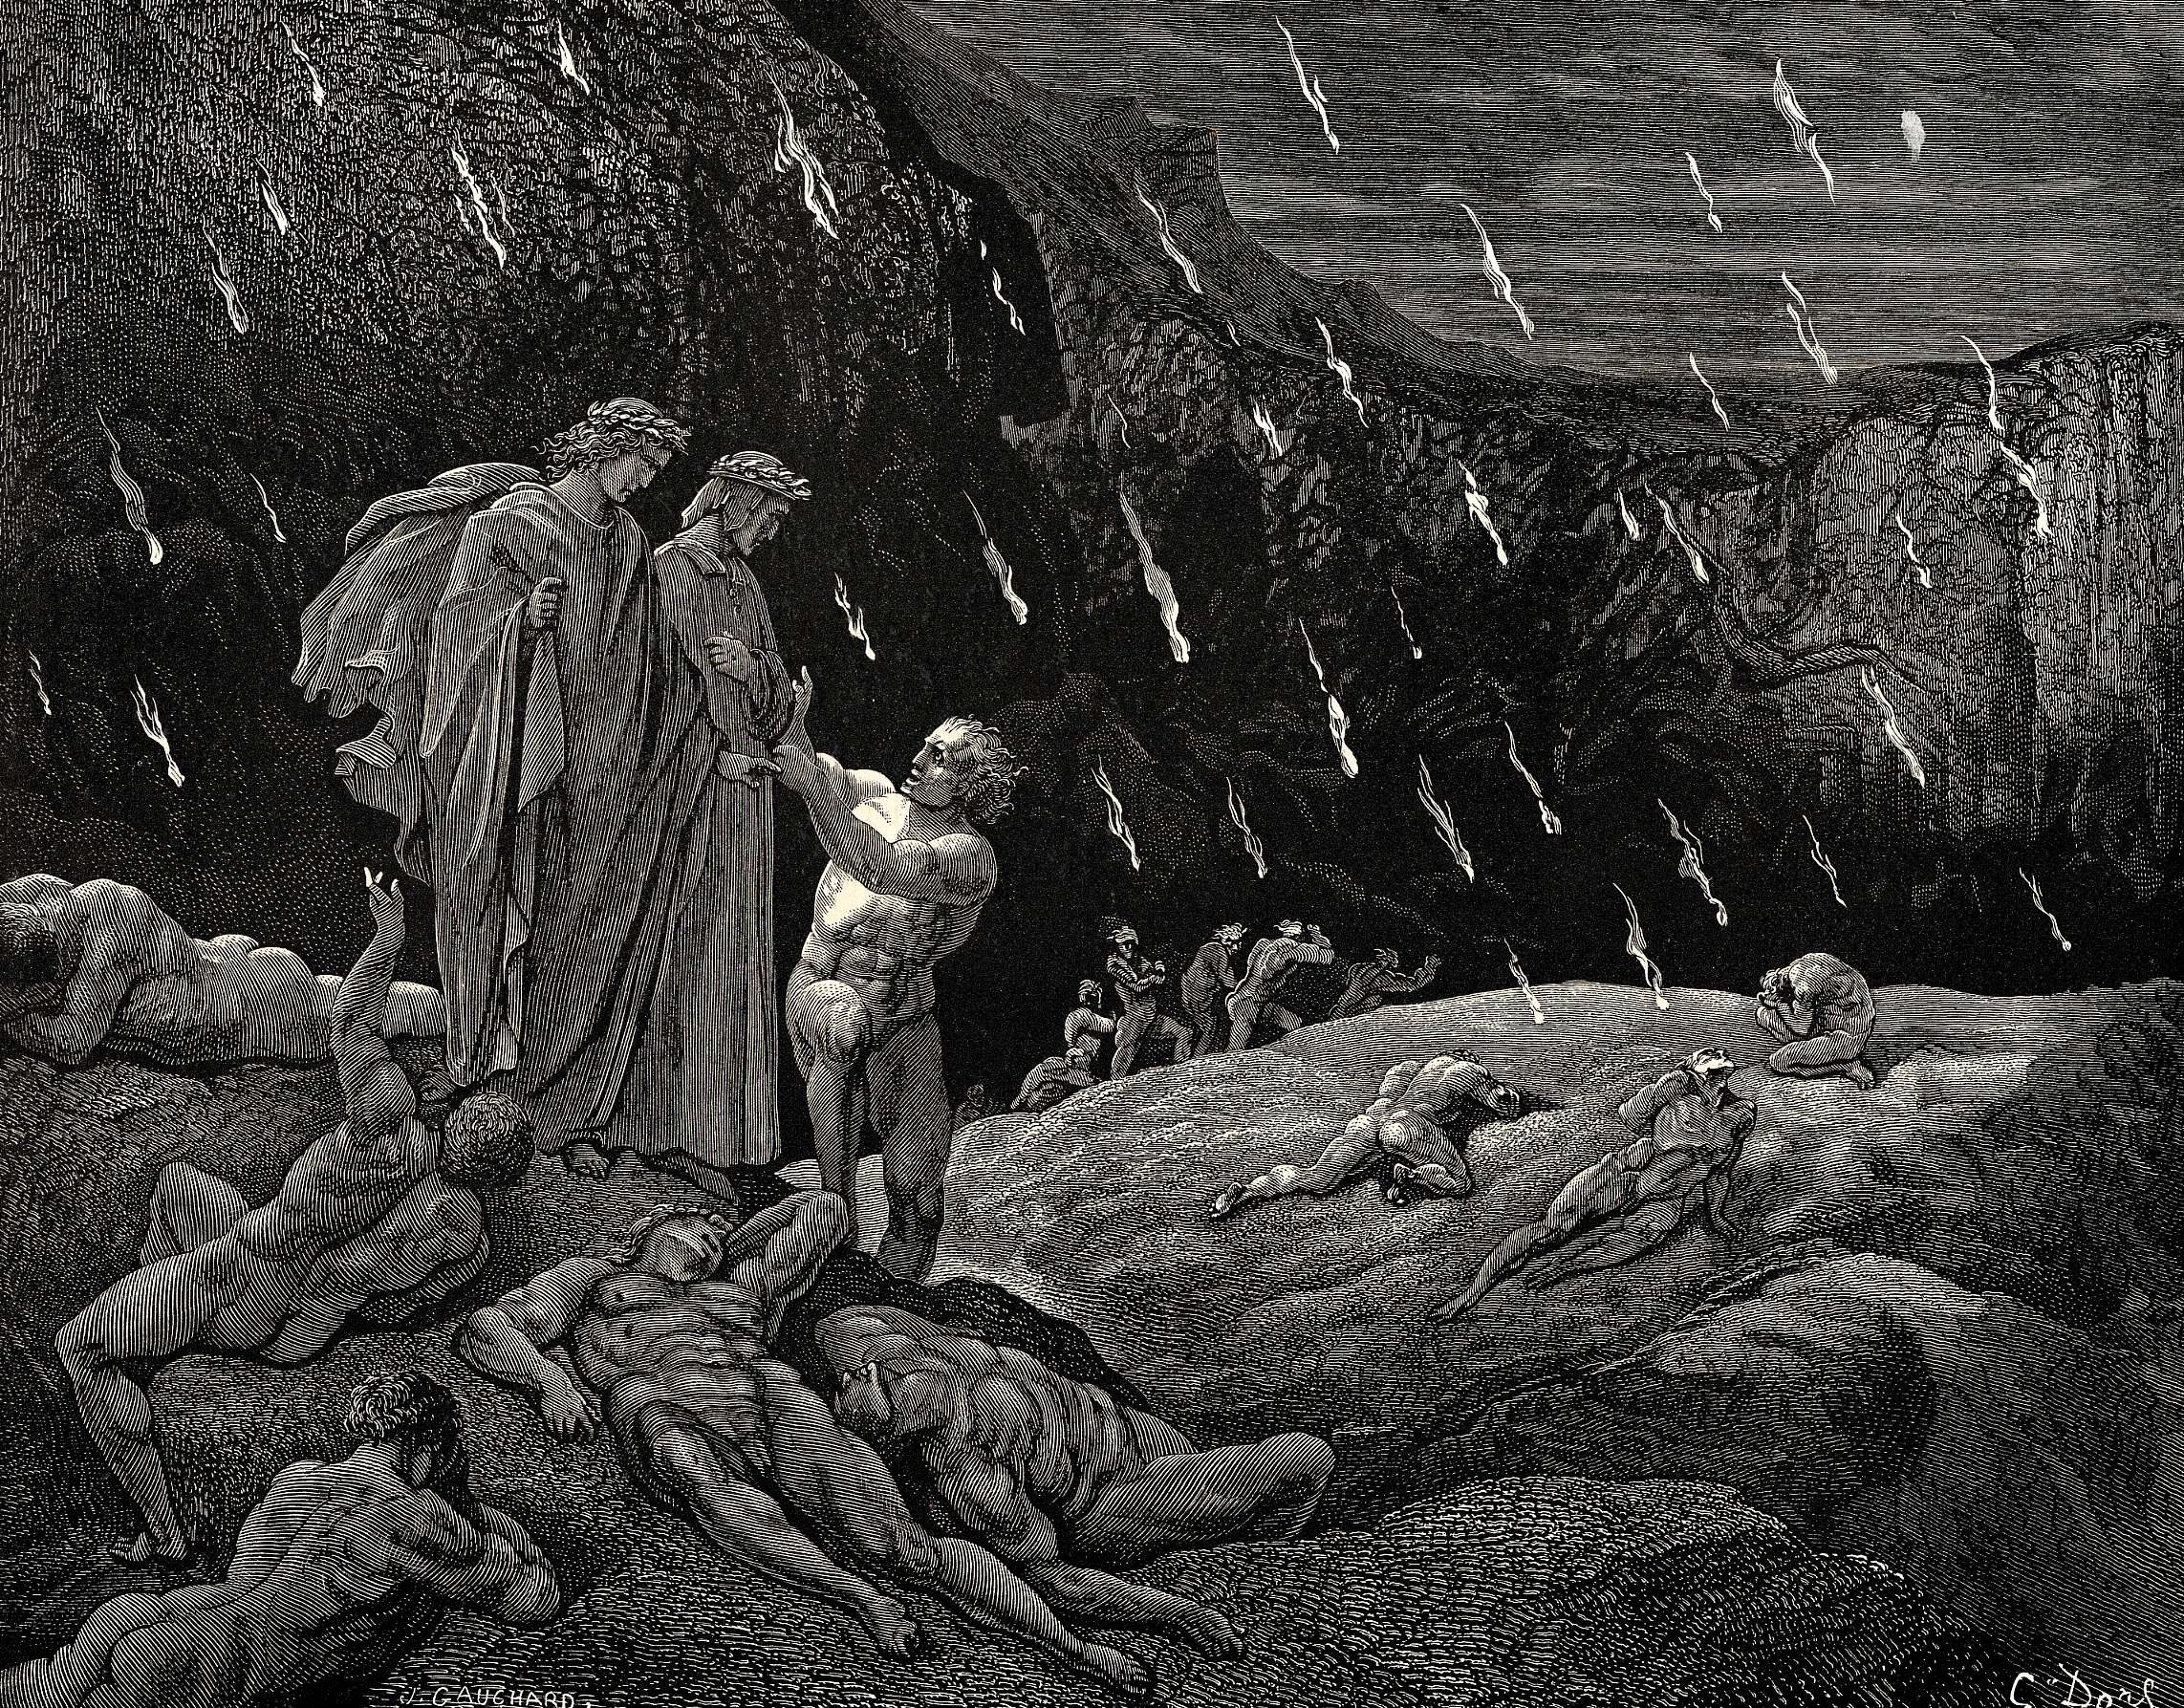 gustave-dore-the-inferno-canto-15-1861-trivium-art-history-1.jpg